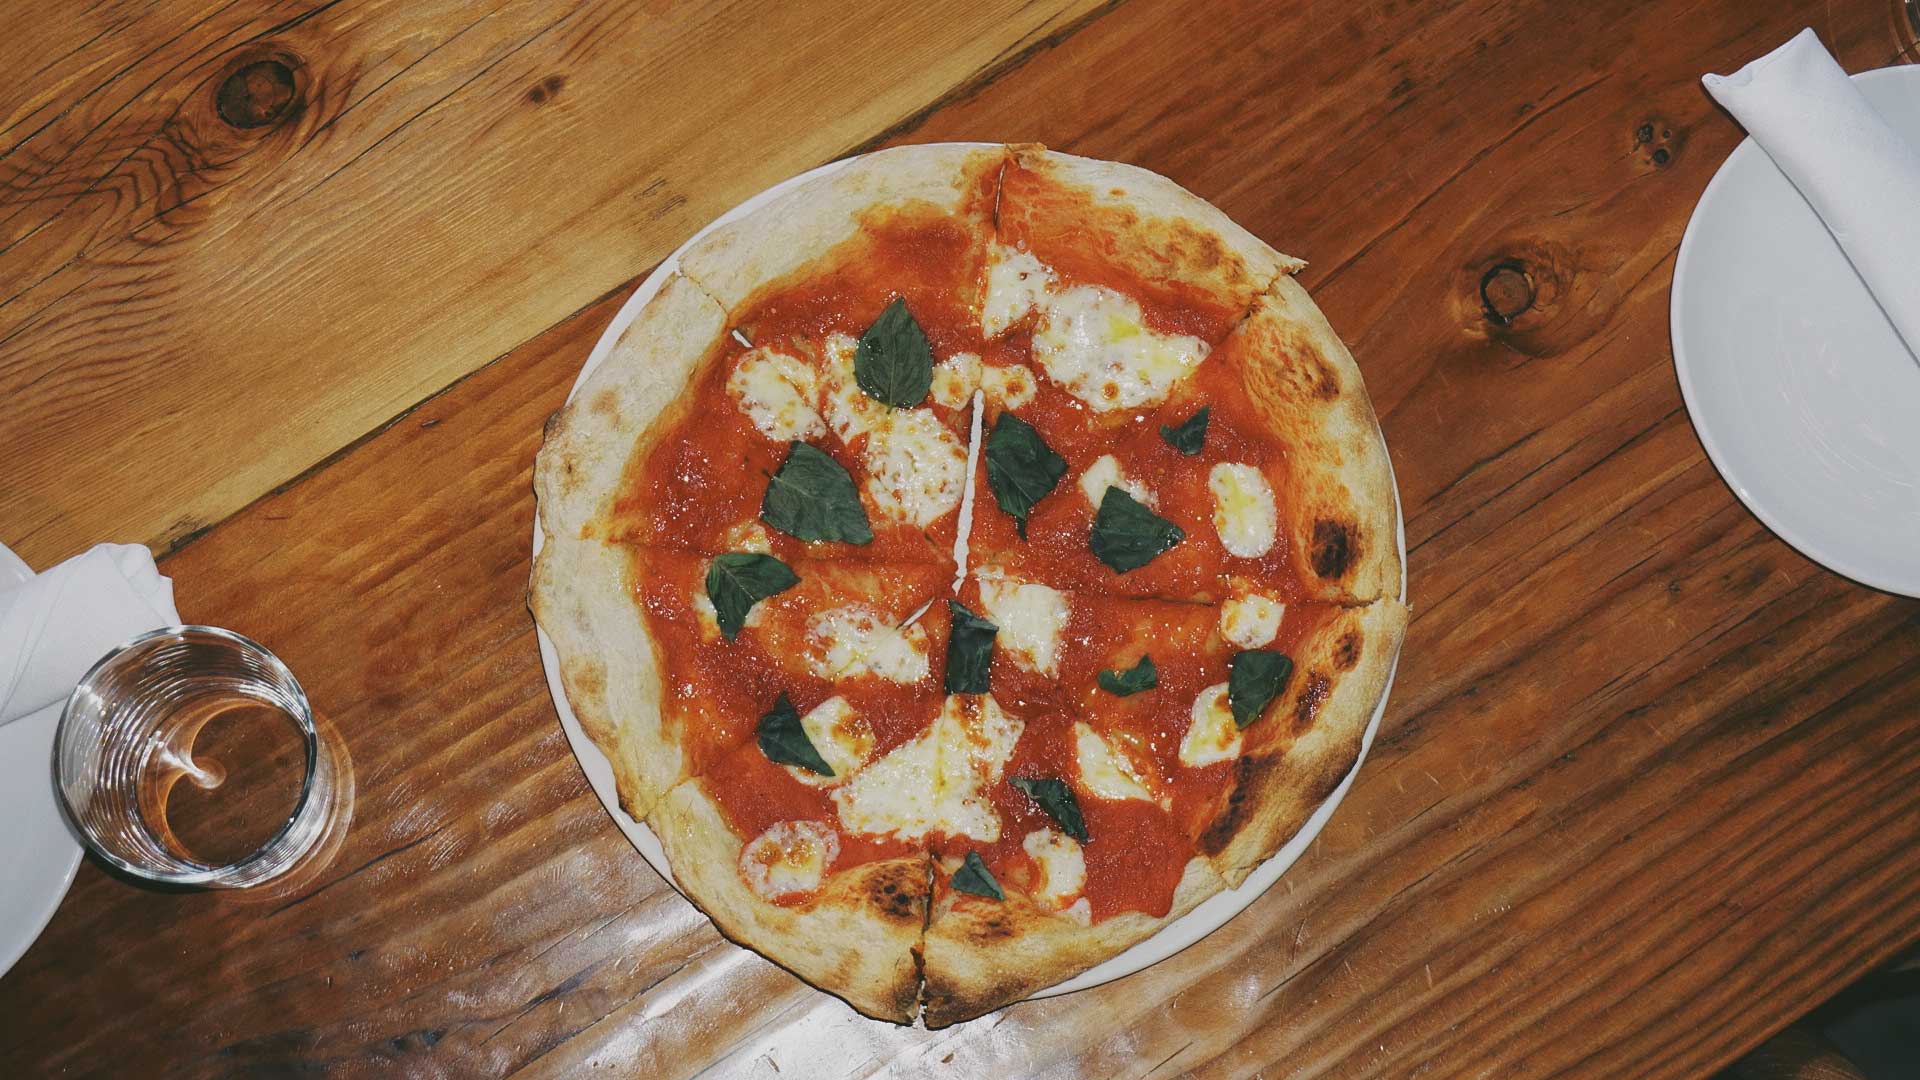 The Margherita Pizza from the Wylder